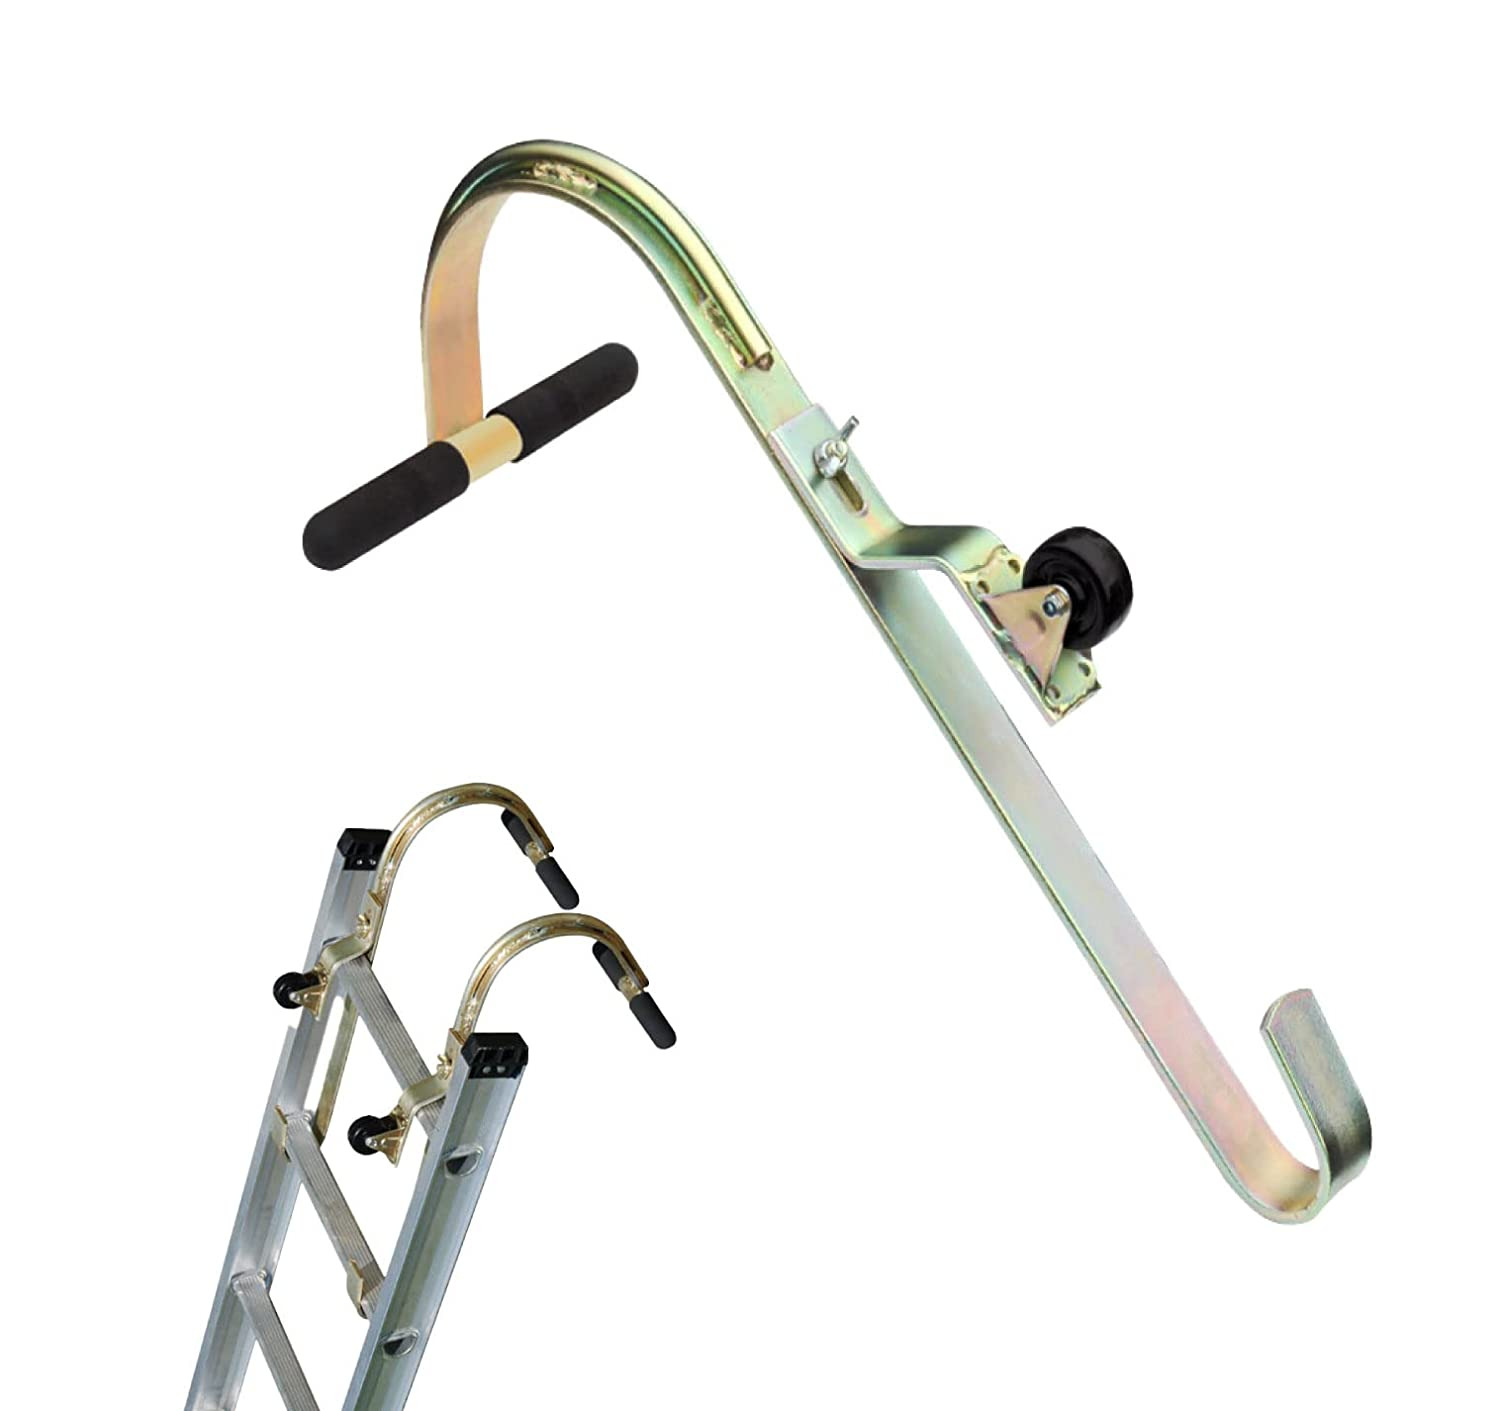 Roof Zone Ladder Hook With Wheel 1-pack Heavy Duty Zinc Plated Steel Easy Setup.